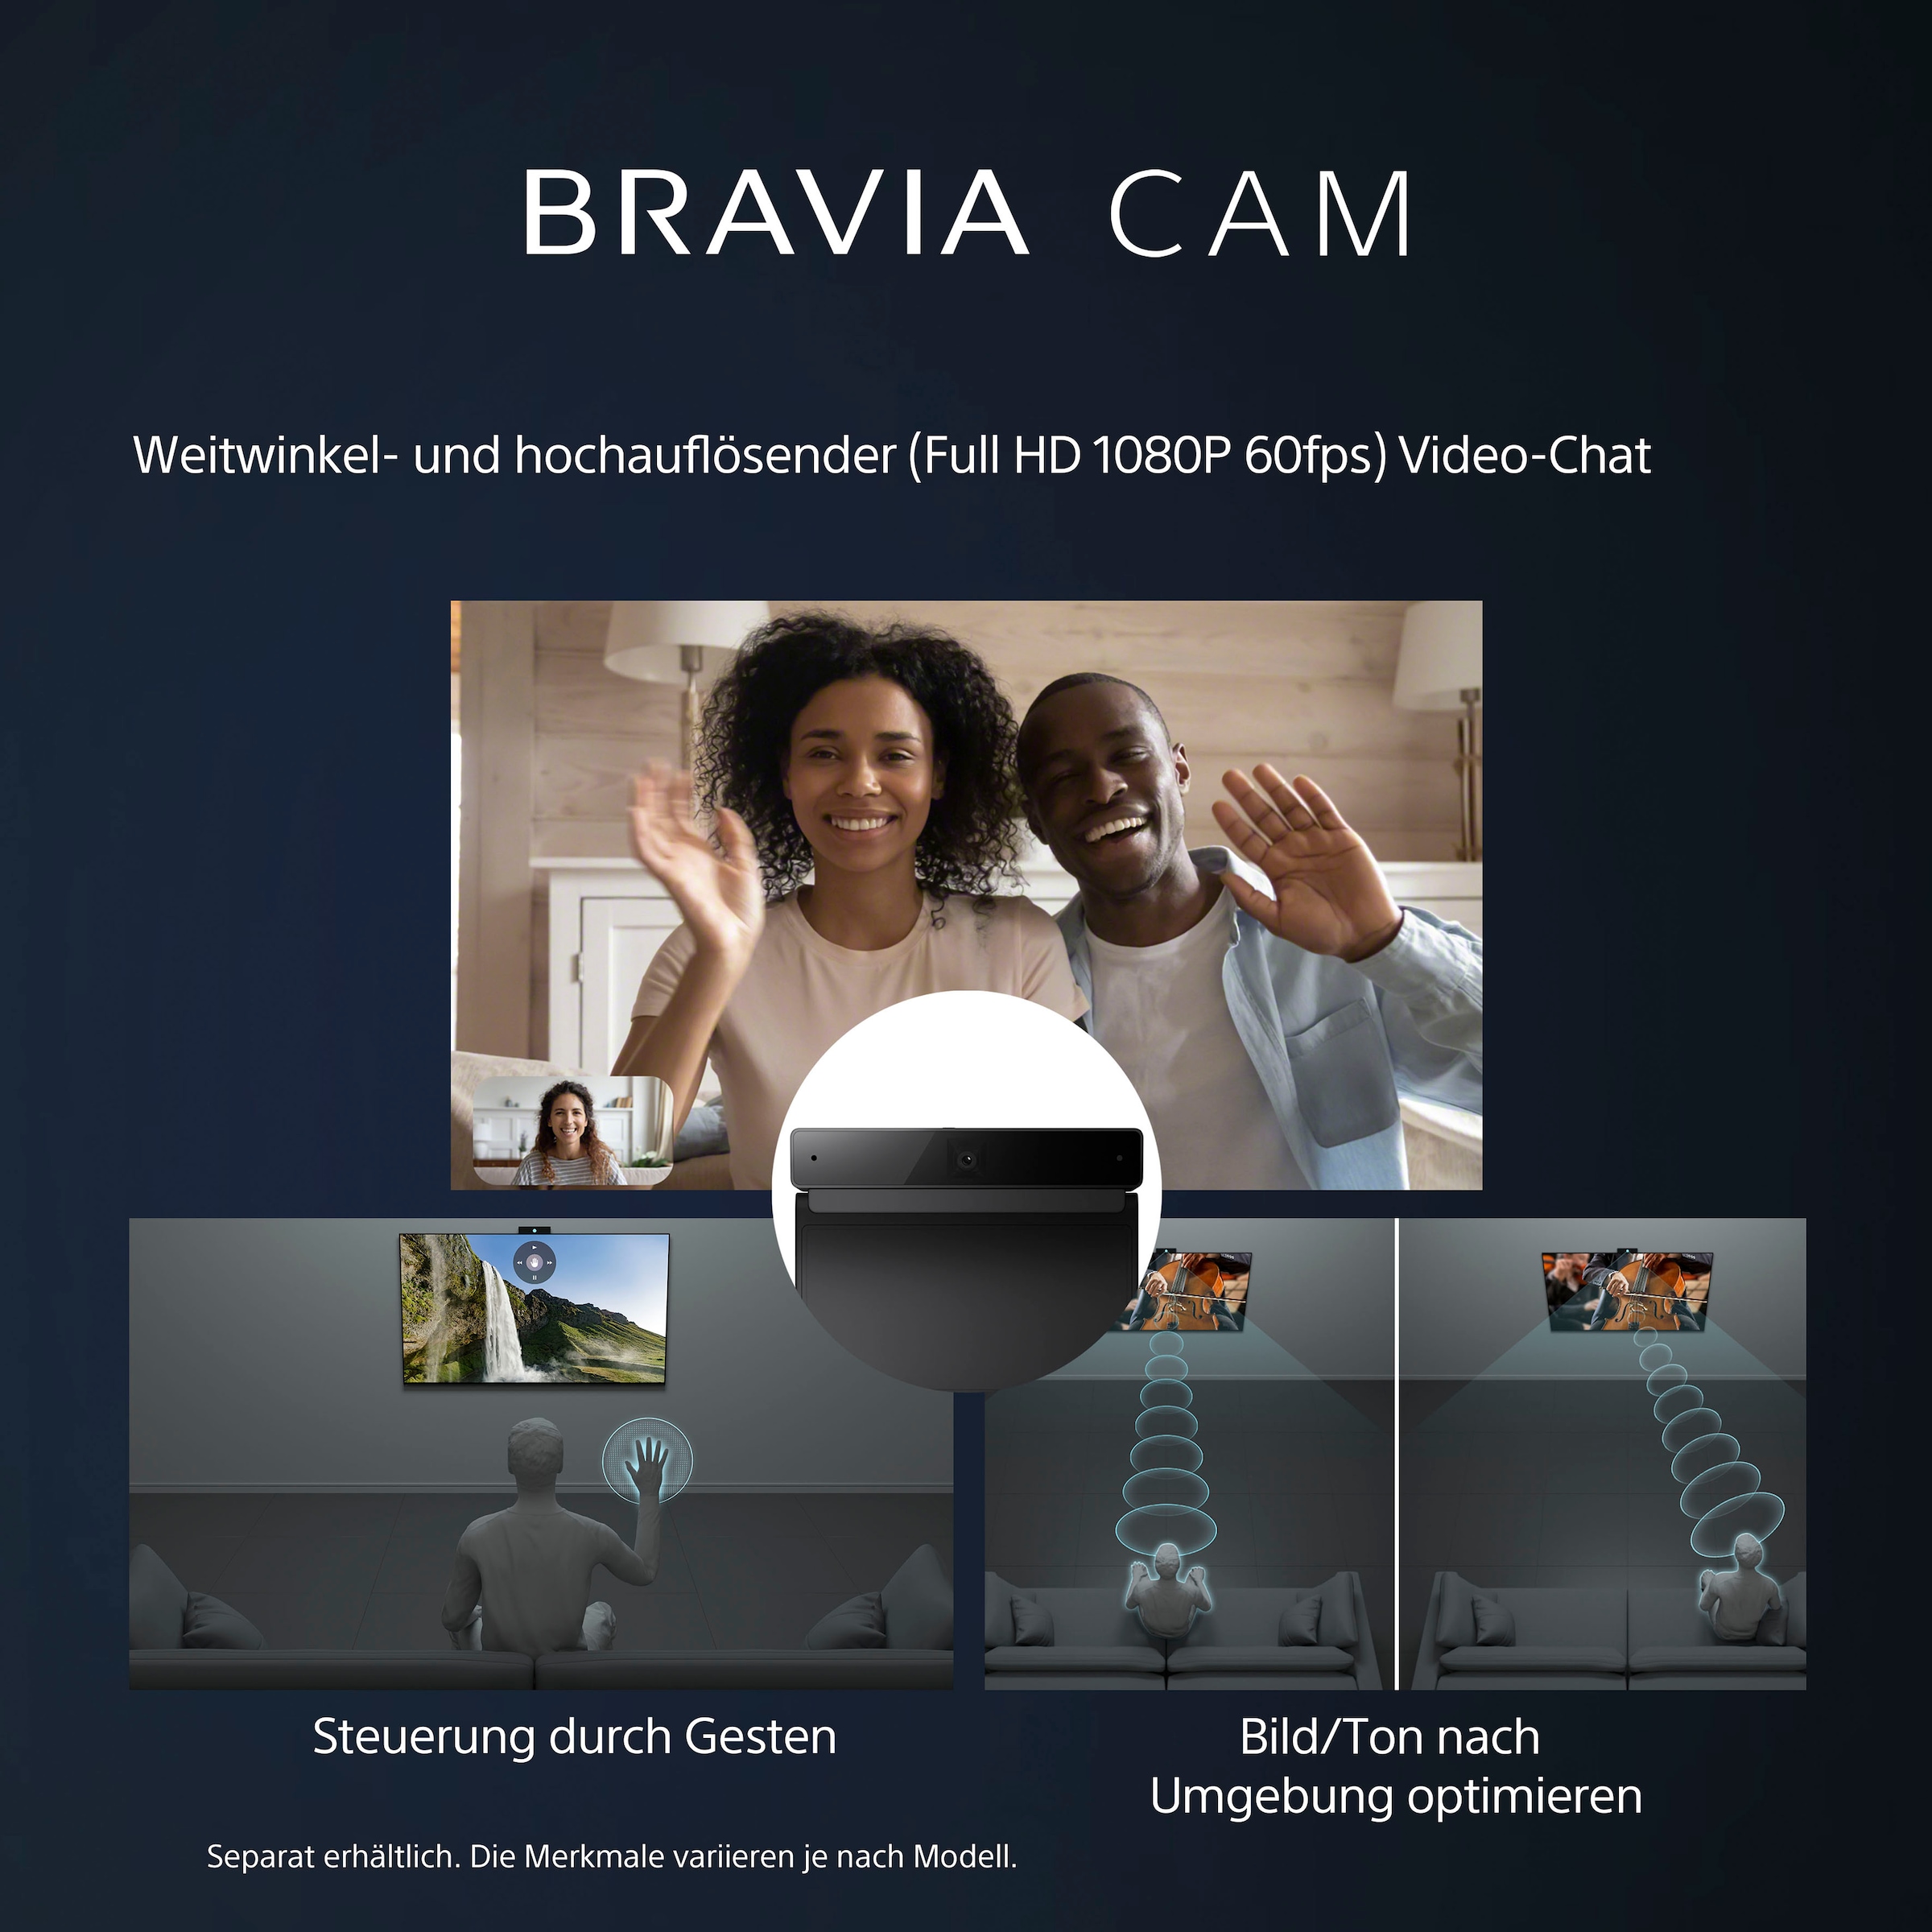 Sony OLED-Fernseher »XR-83A80L«, 210 cm/83 Zoll, 4K Ultra HD, Google TV-Smart-TV-Android TV, Smart-TV, TRILUMINOS PRO, BRAVIA CORE, mit exklusiven PS5-Features